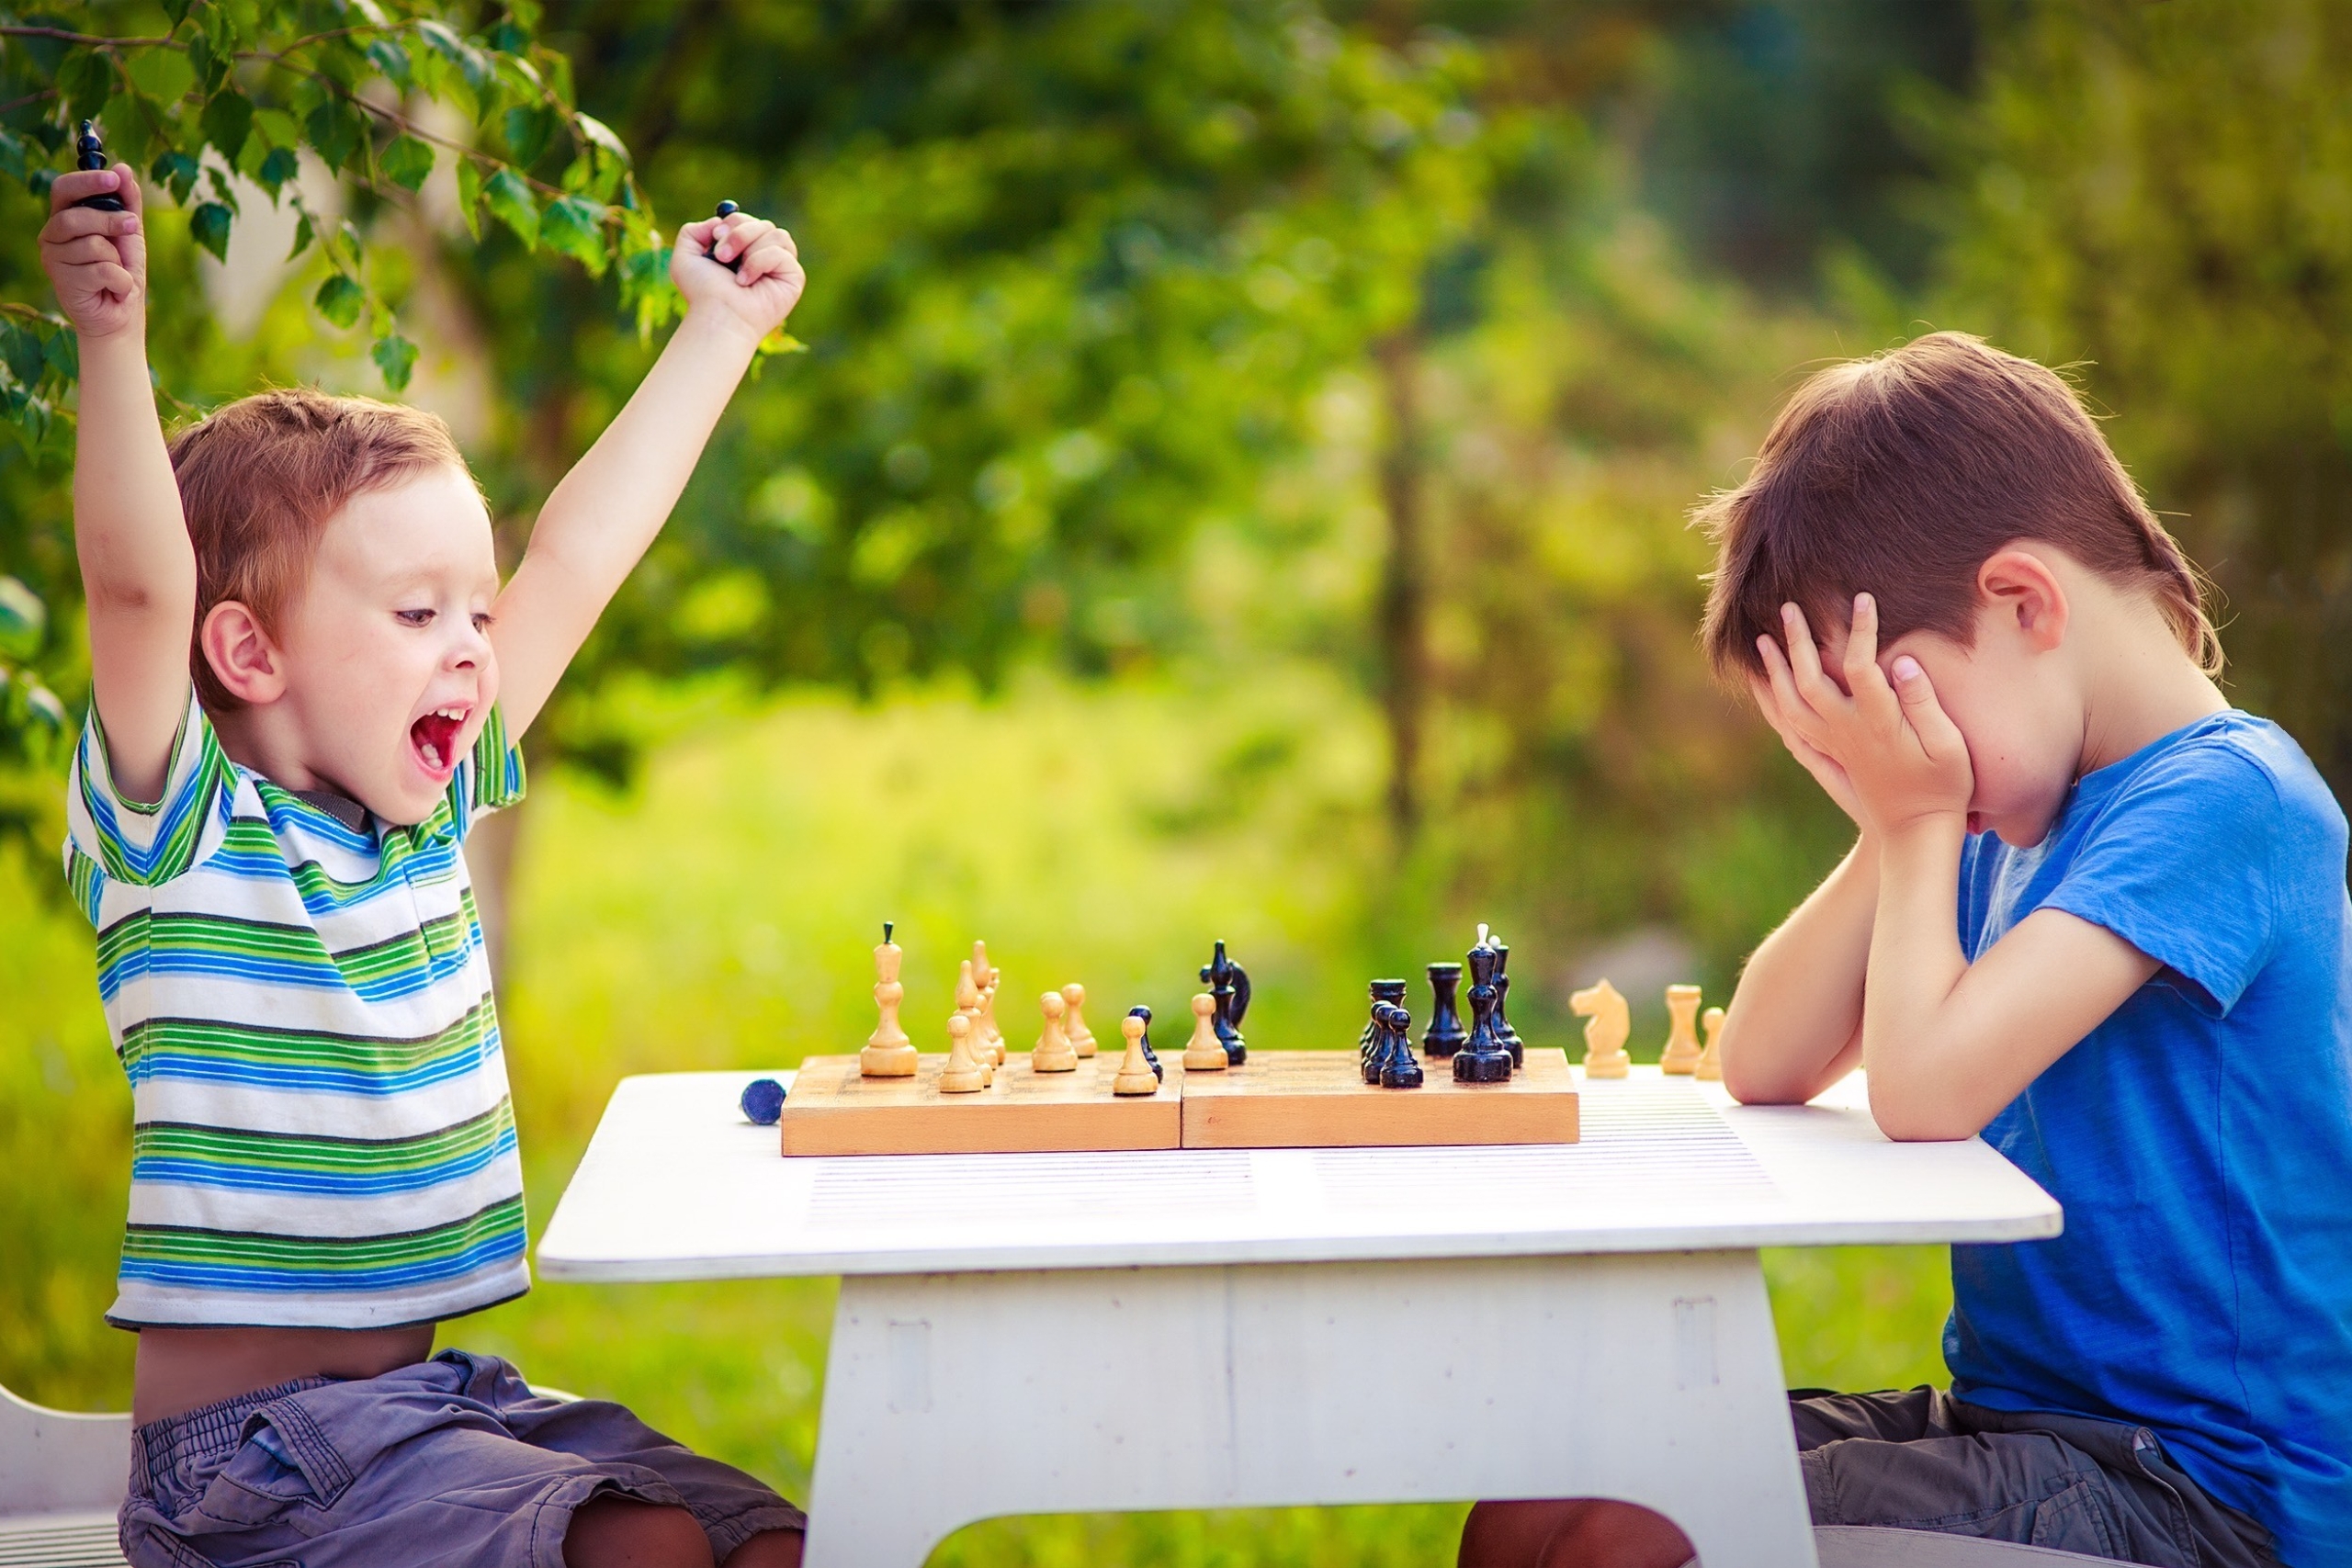 two boys playing chess, one has just won the game and is celebrating